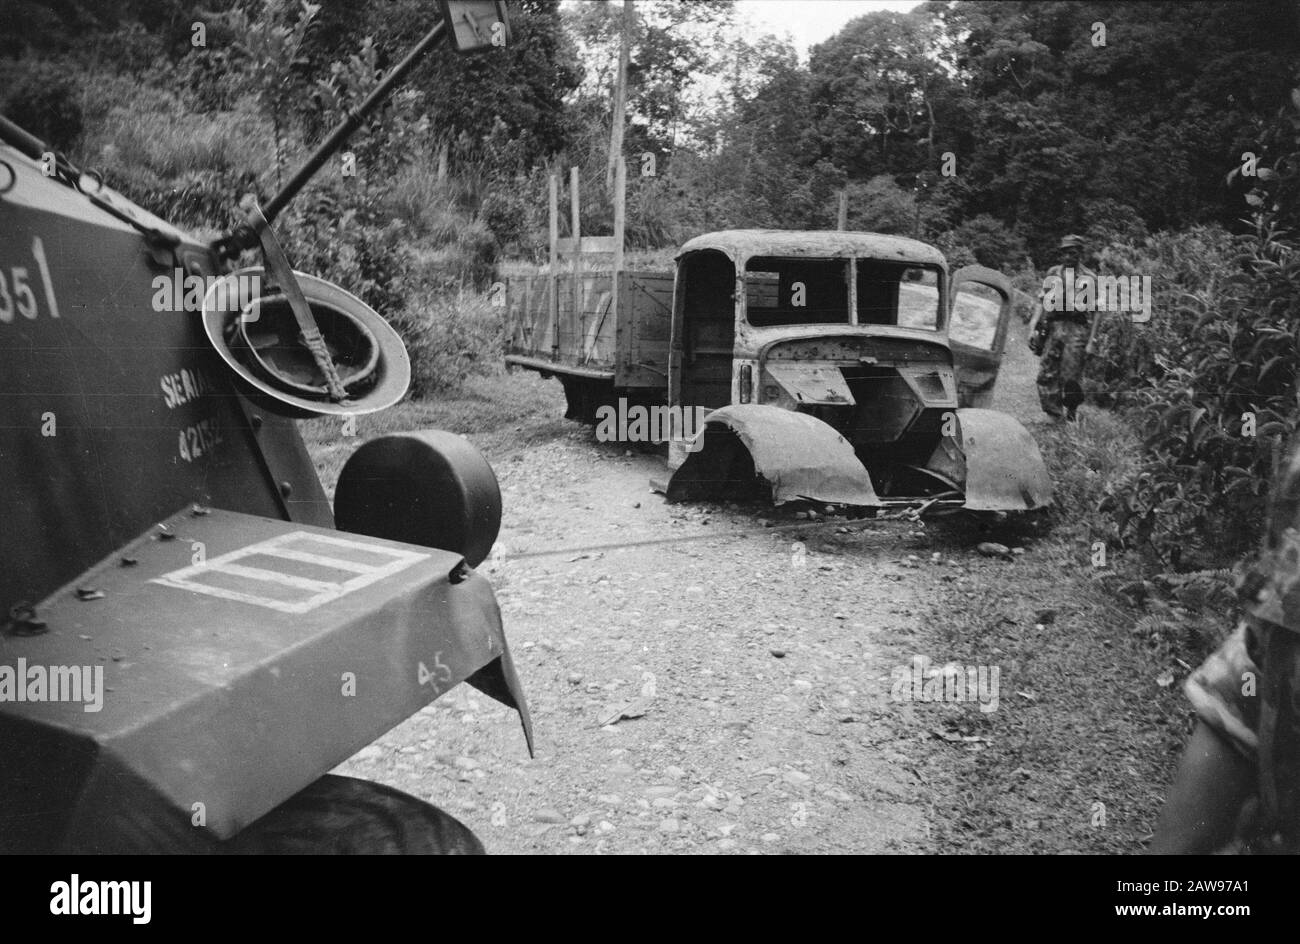 Action Kota Padang  Kotta Padan. Cable fixed, backward-free way !! Primitive roadblocks were quickly cleared Date: July 1947 Location: Indonesia Dutch East Indies Stock Photo